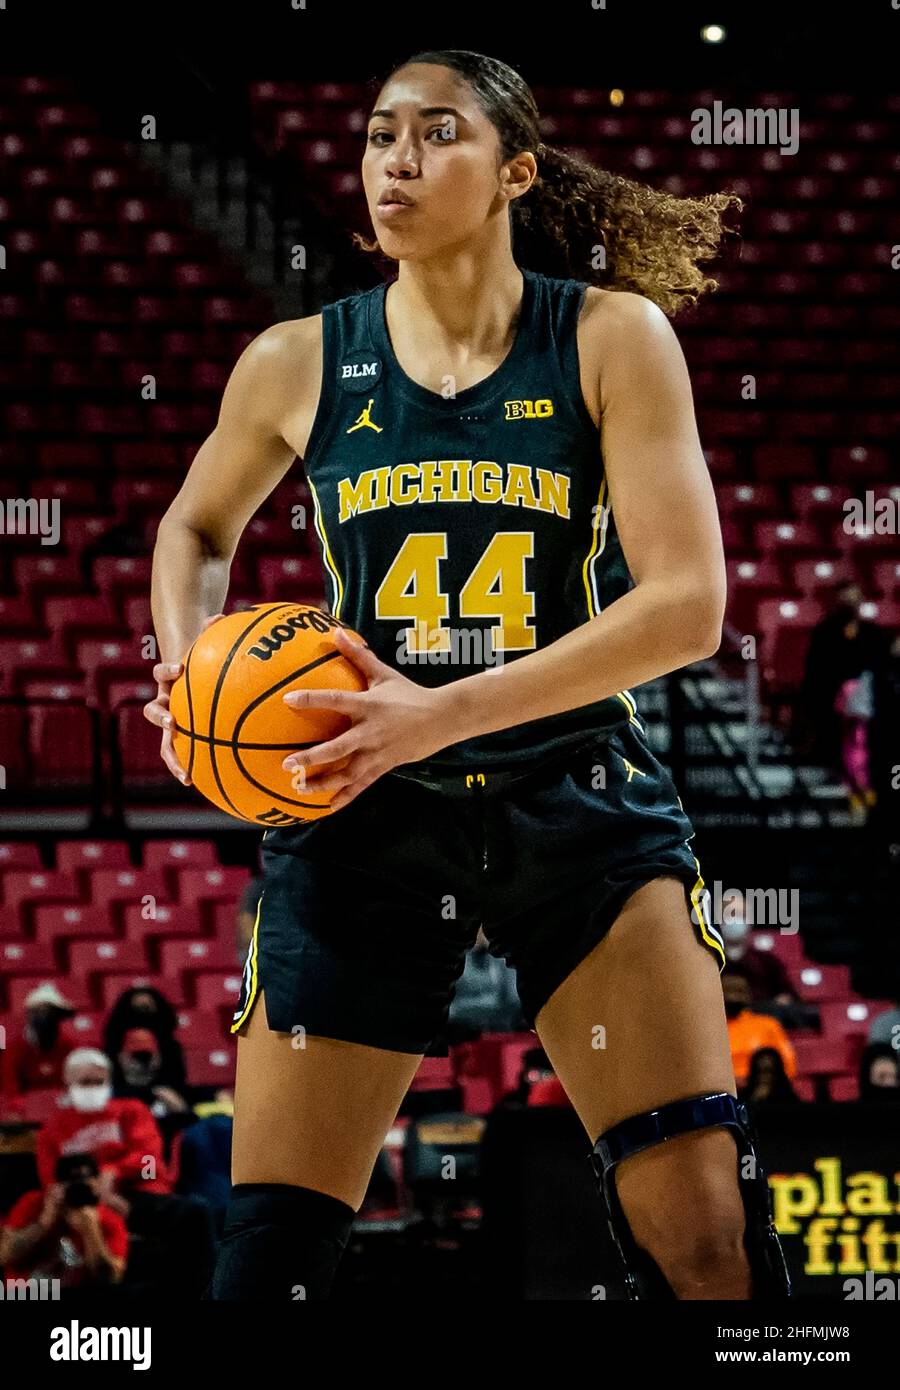 COLLEGE PARK, MD - JANUARY 16: Michigan Wolverines forward Cameron Williams (44) in action during a Big10 women's basketball game between the Maryland Stock Photo